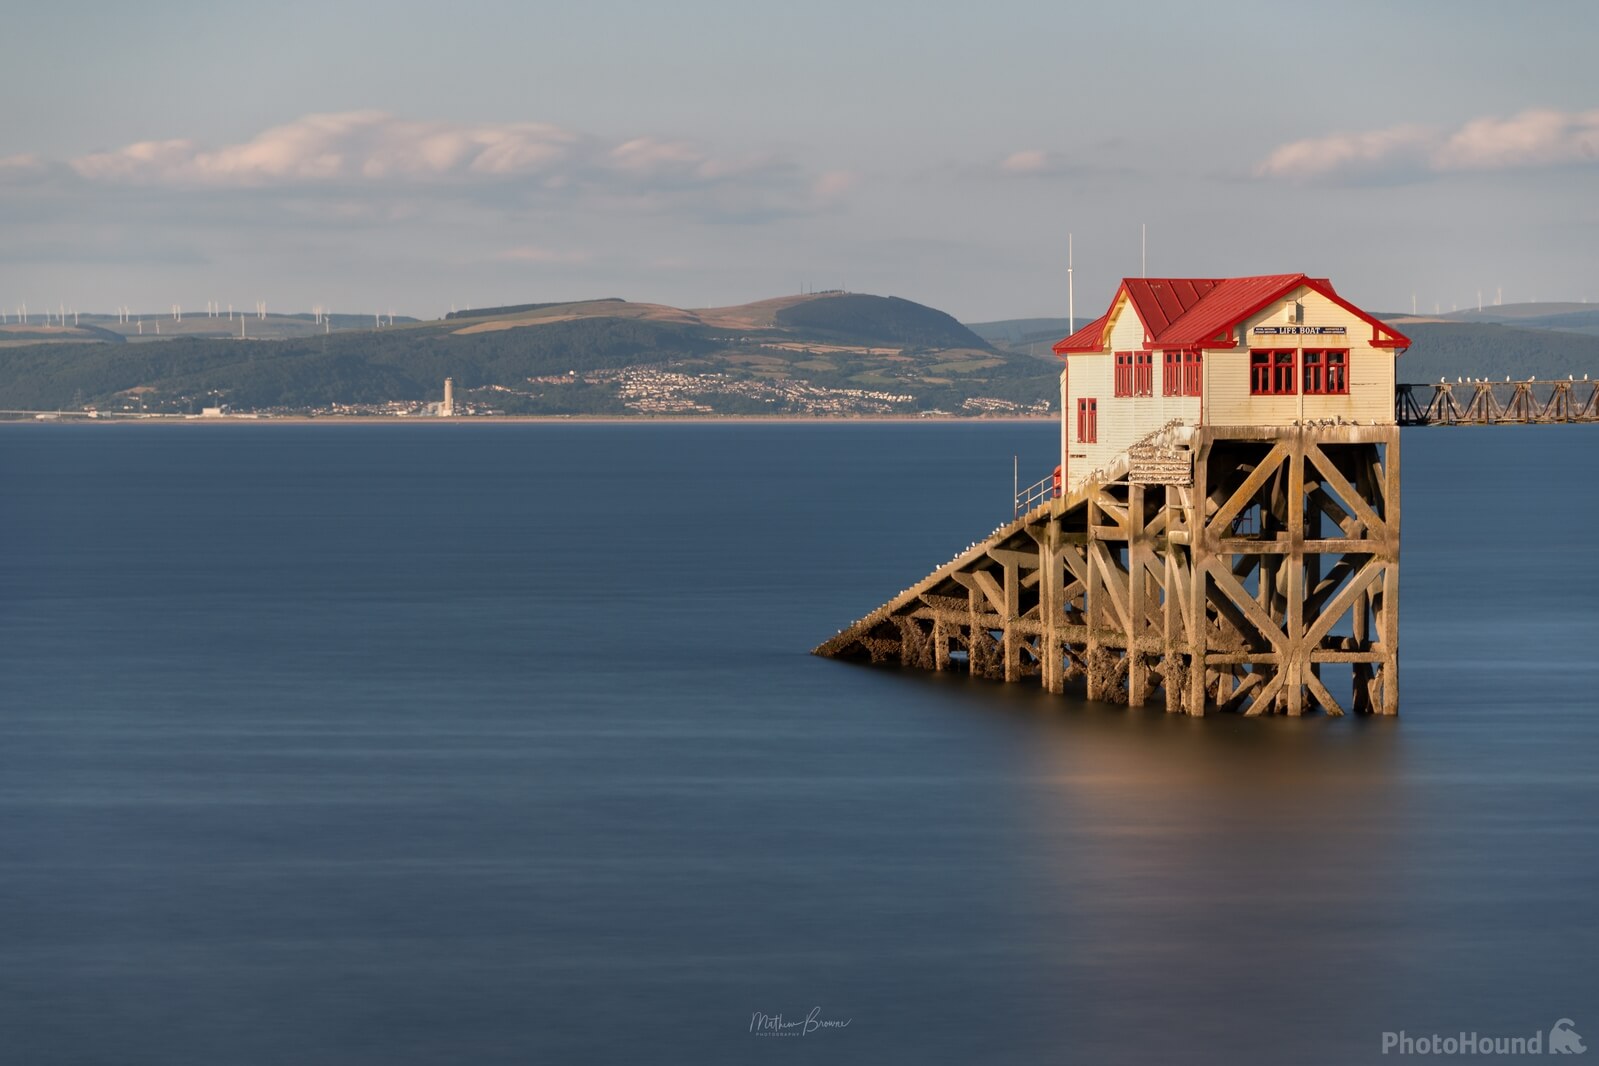 Image of Mumbles Pier & Lighthouse by Mathew Browne